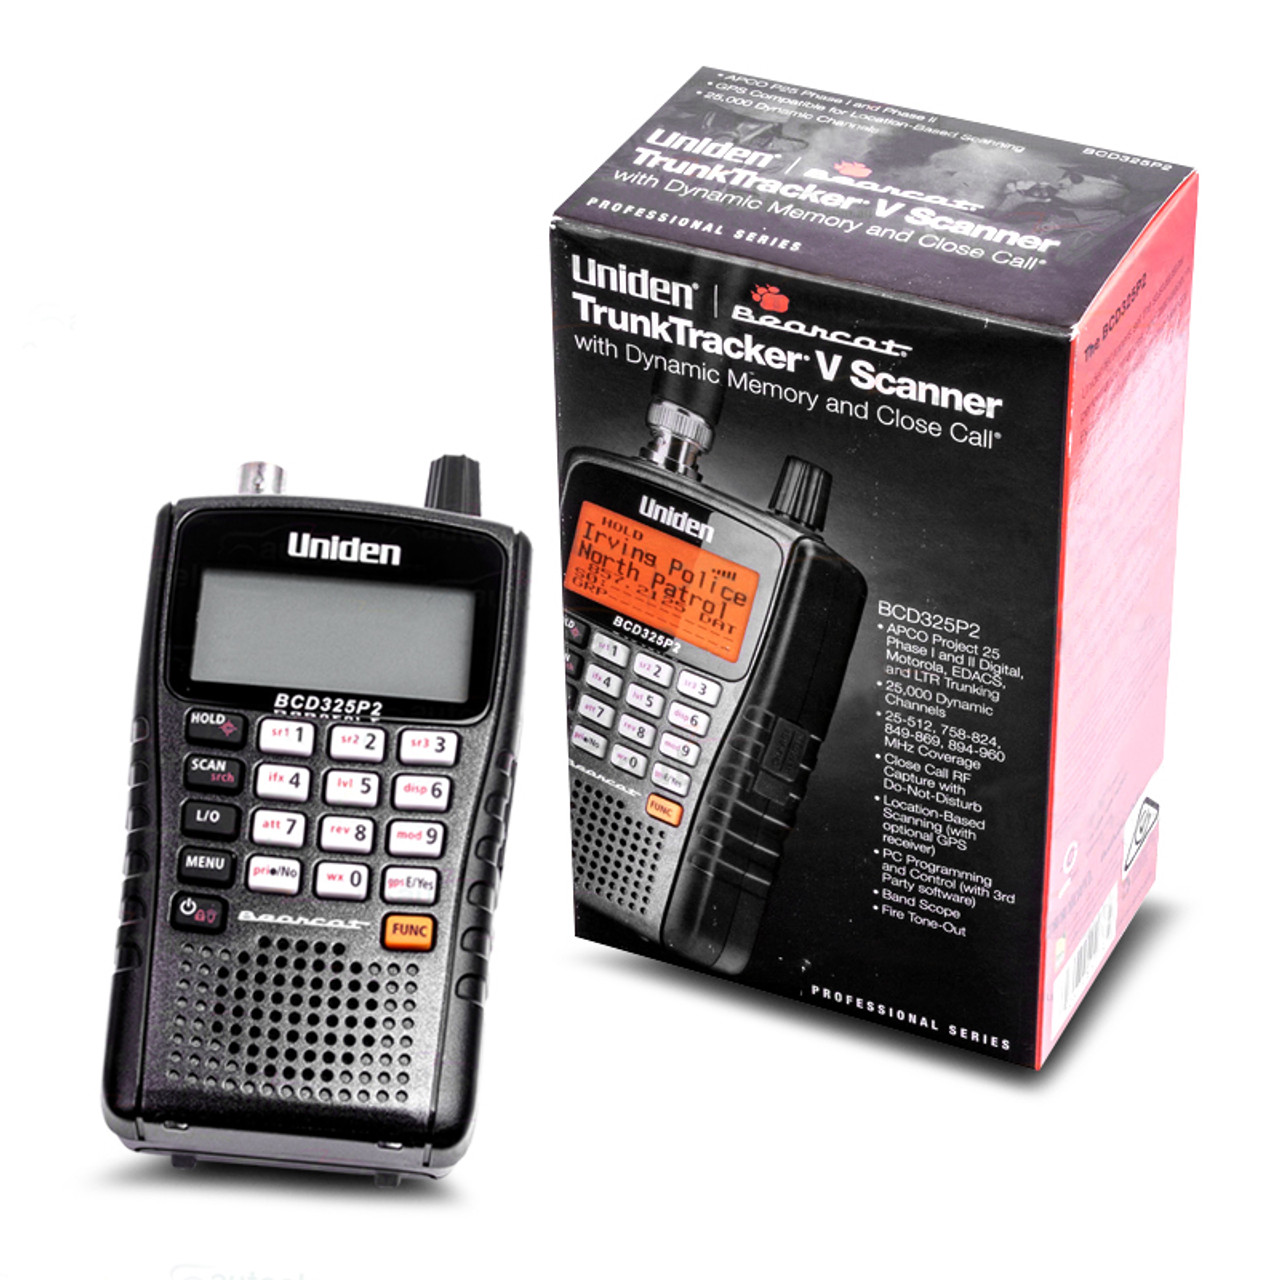 Uniden BCD325P2 Handheld TrunkTracker V Scanner. 25,000 Dynamically Allocated Channels. Close Call RF Capture Technology. Location-Based Scanning and - 2